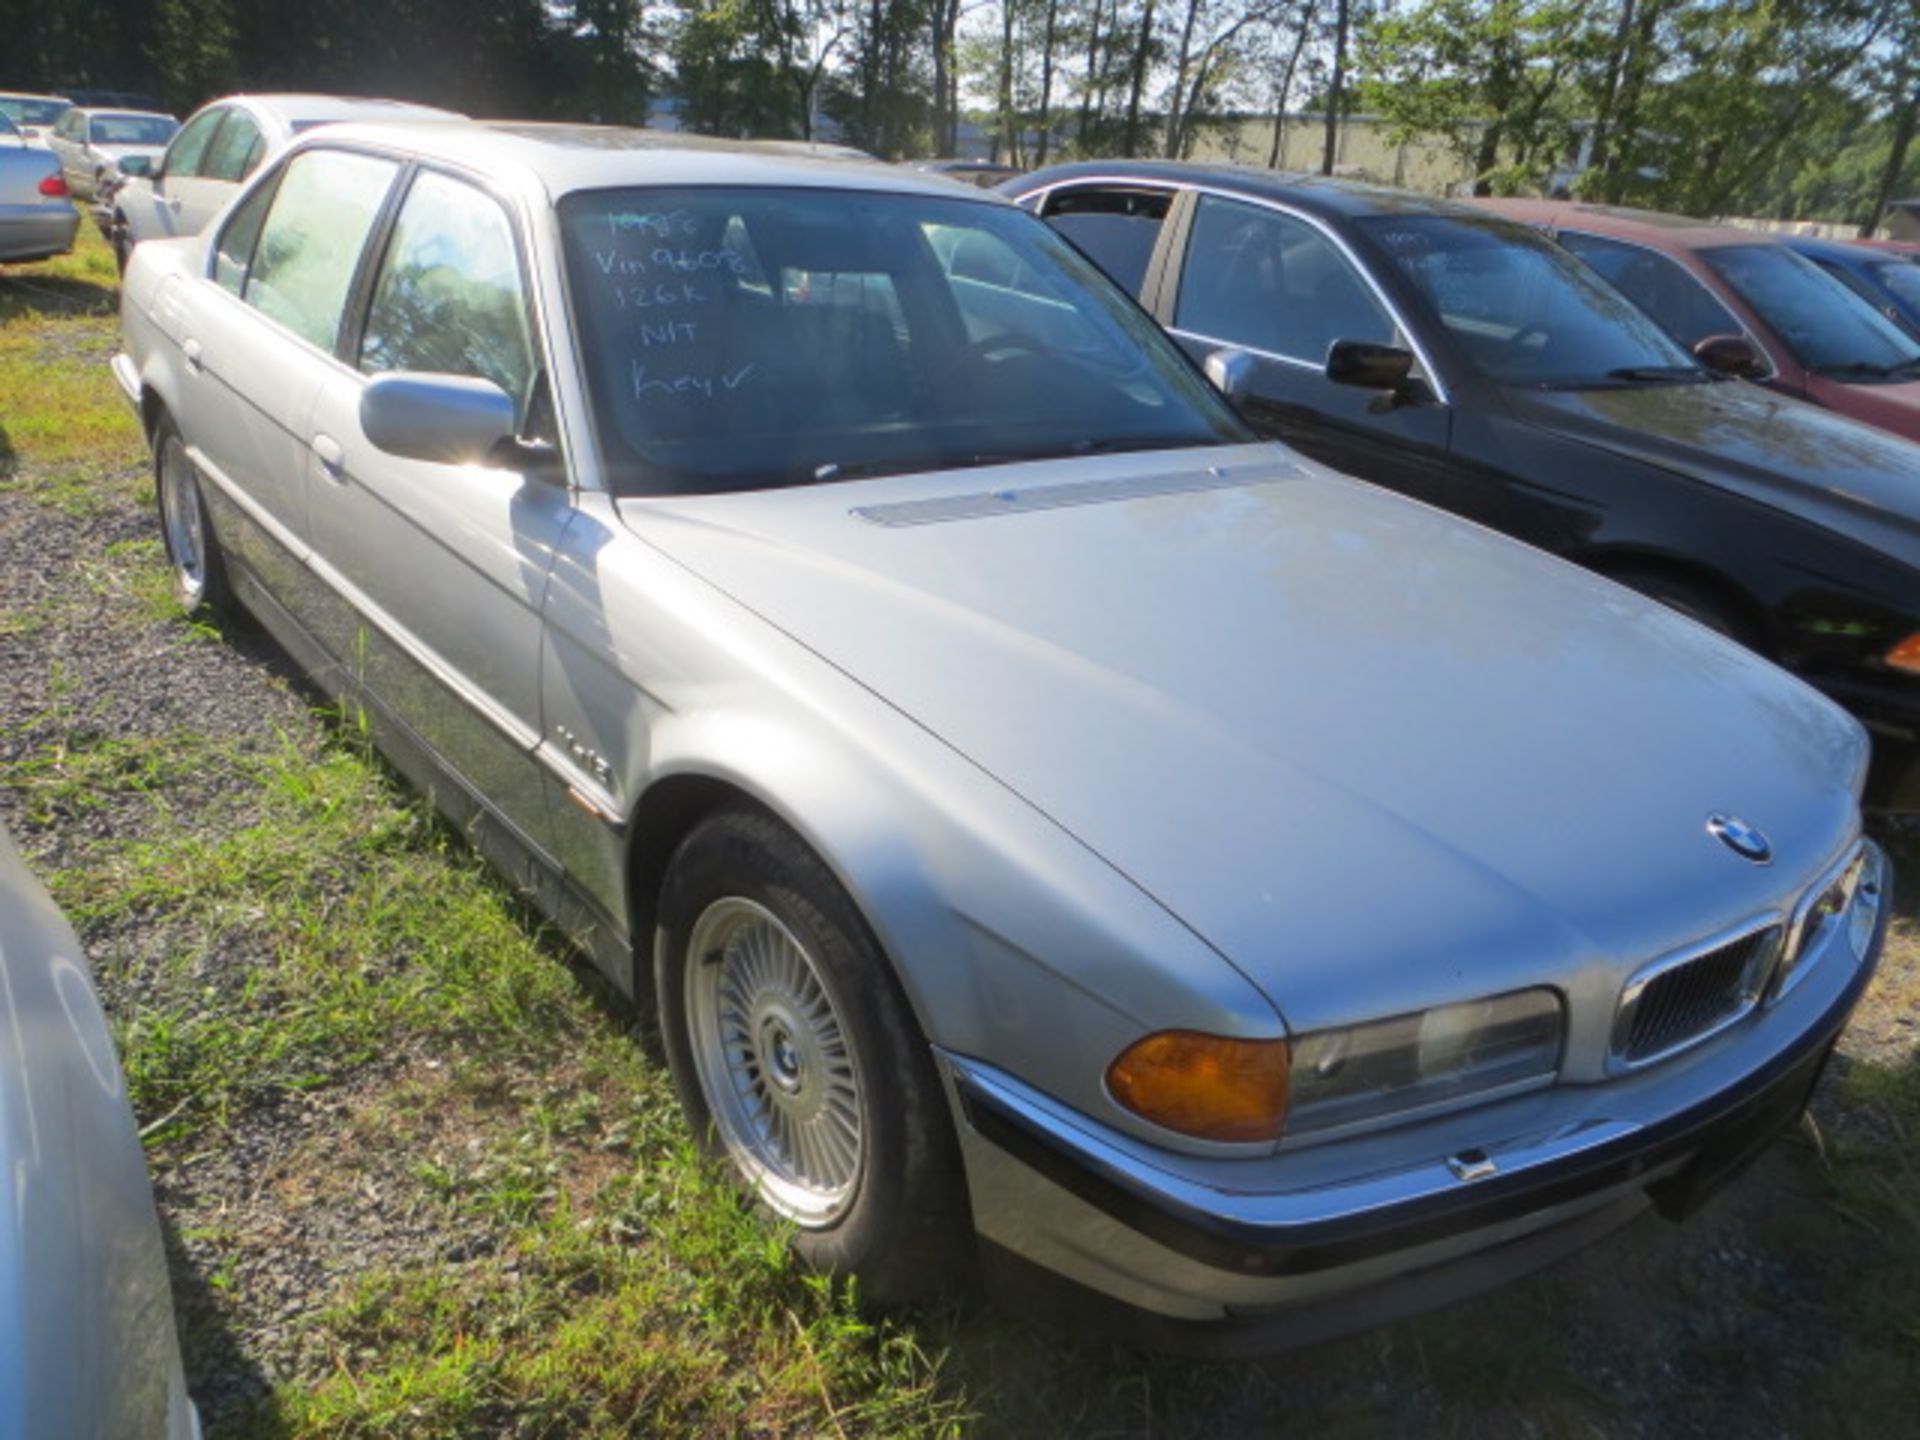 1998 BMW 750iL-NEEDS WORK-CRACKED SIDE GLASS 126000 MILES,VIN WBAGK232XWDH69608, SOLD WITH GOOD TRAN